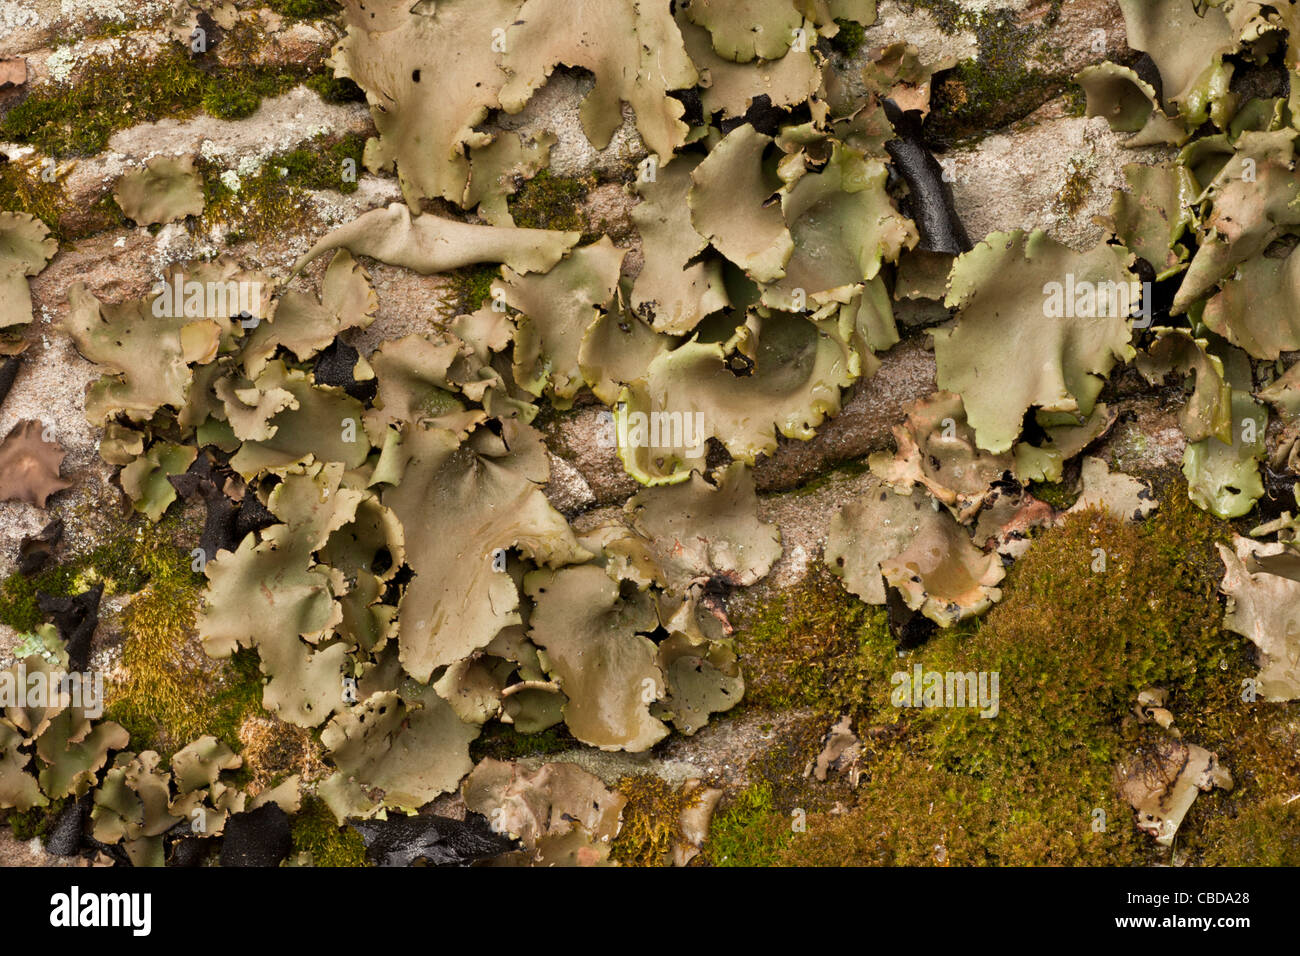 Umbilicaria mammulata lichen, a type of rock-tripe on vertical rock-face, Catskill Mountains, New York State. Stock Photo